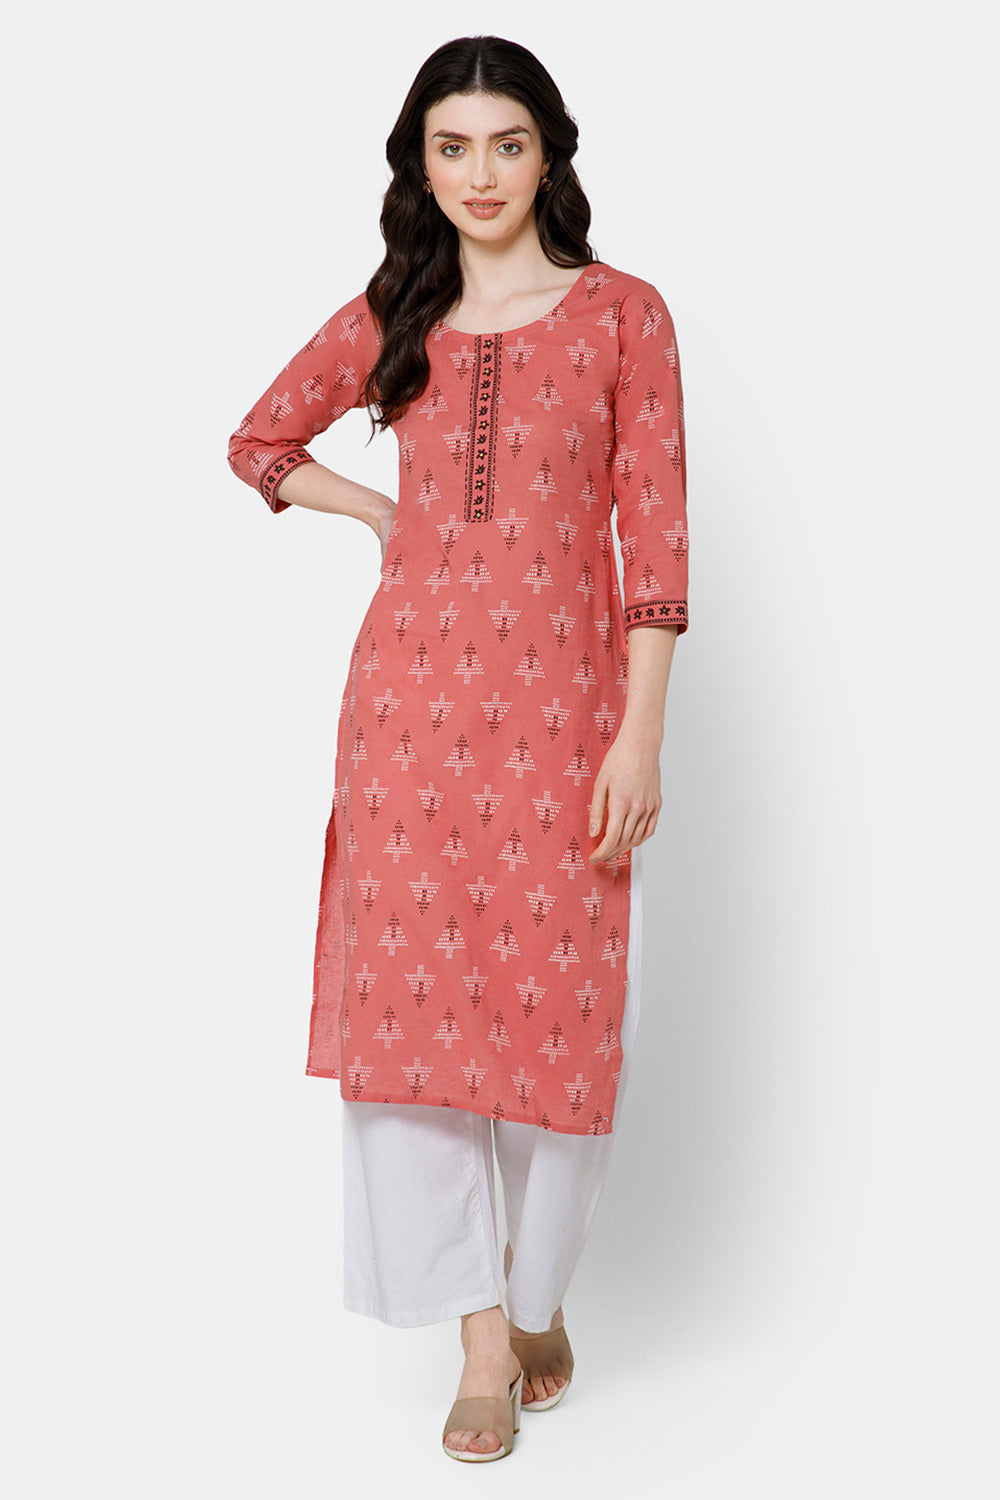 Mythri Women's Casual Kurthi with Patchwork And Minimalistic Embroidery - Peach - E029